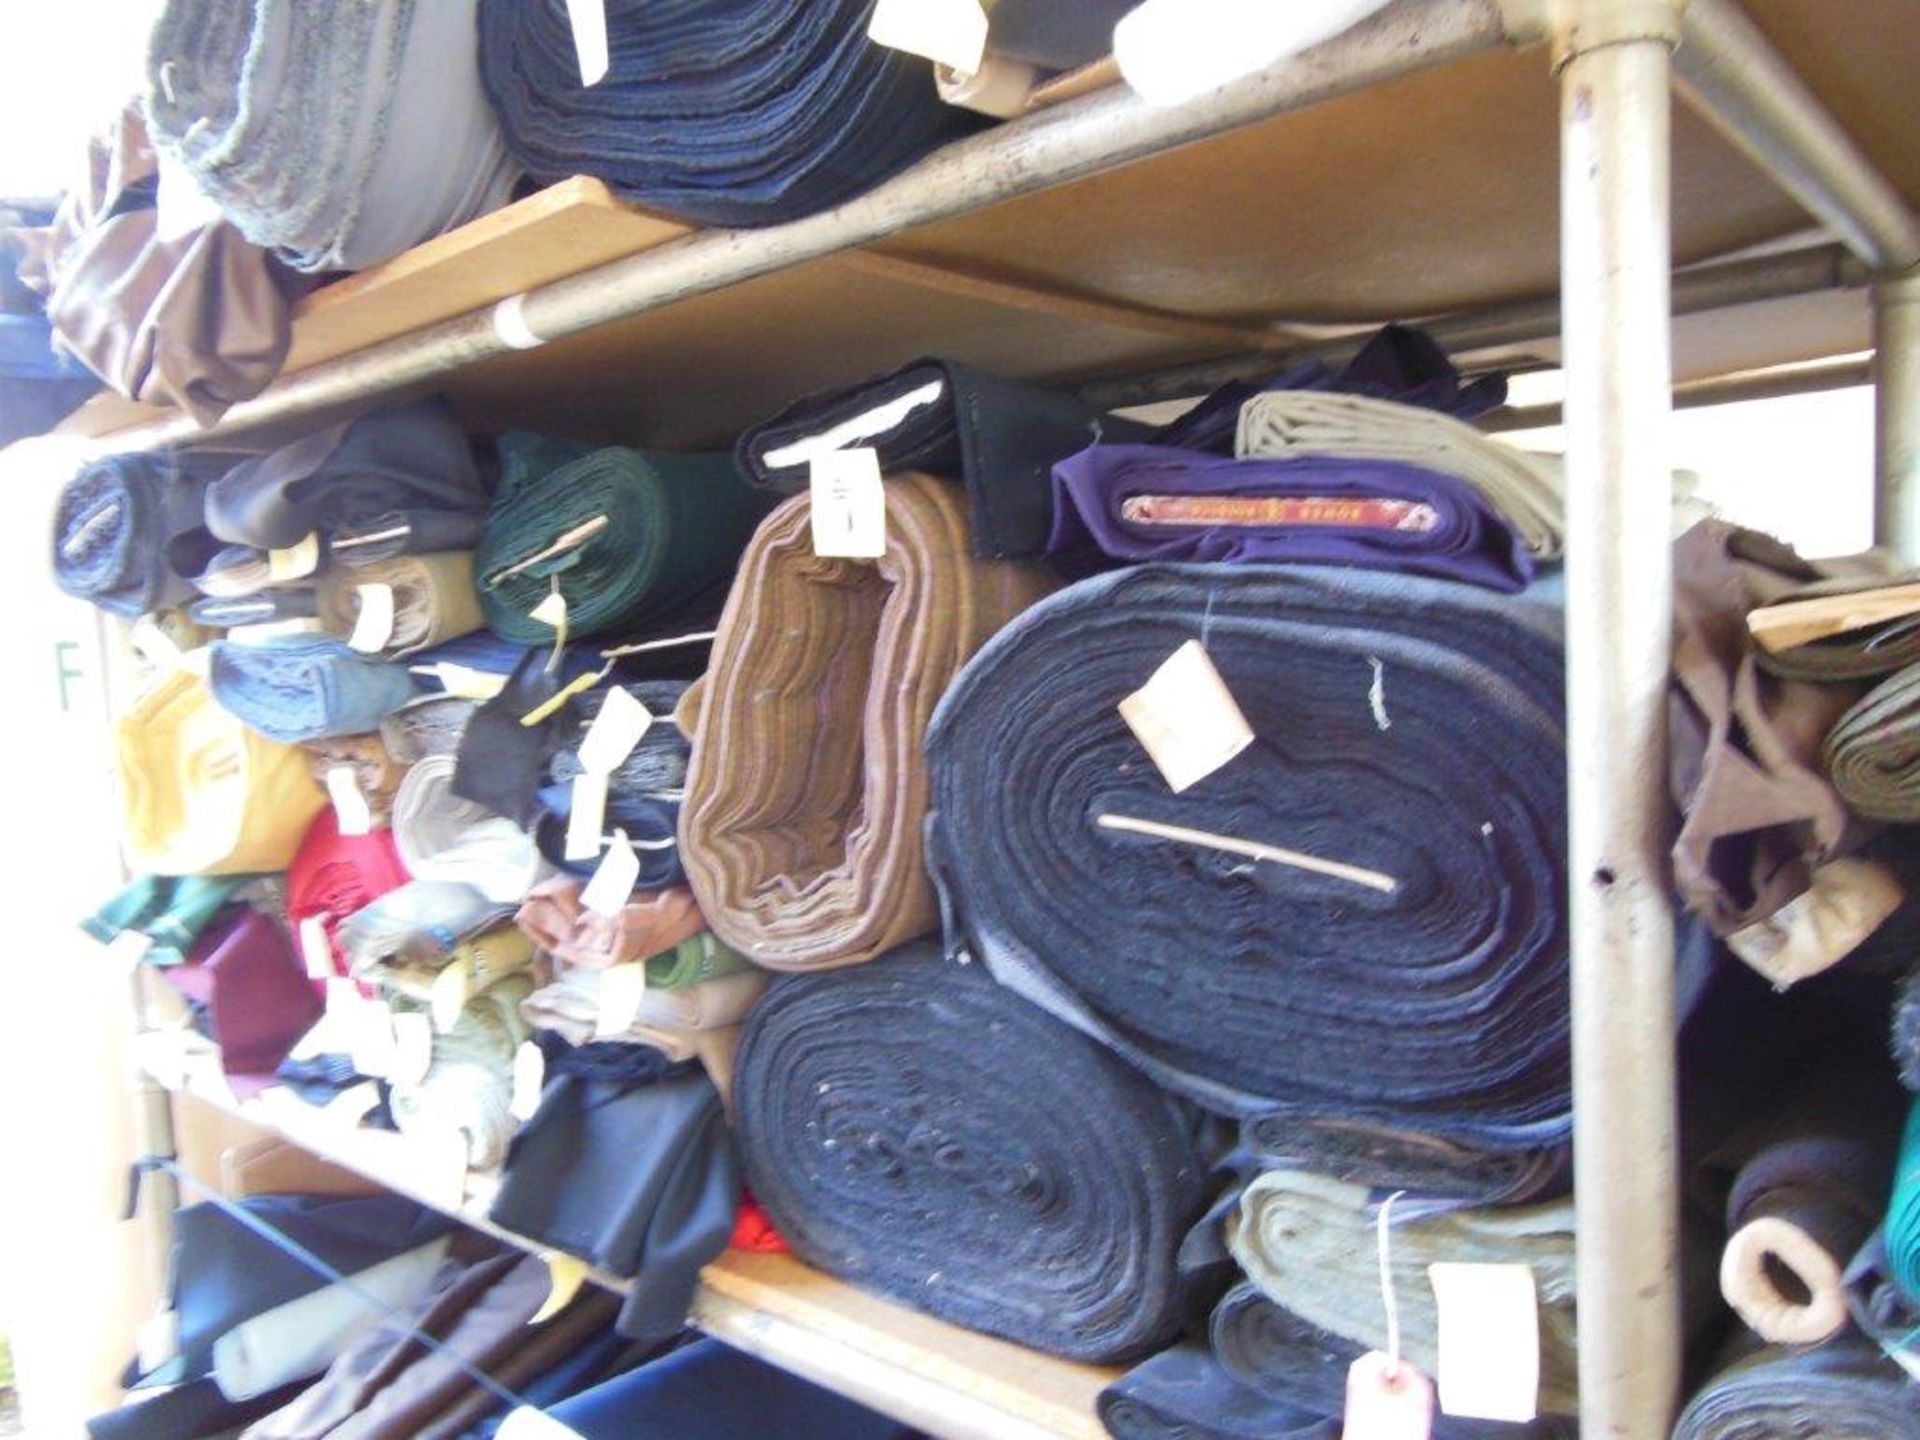 Large quantity of assorted fabrics including tweed, wool and cotton, in 3 bay steel keyway rack - Image 6 of 6